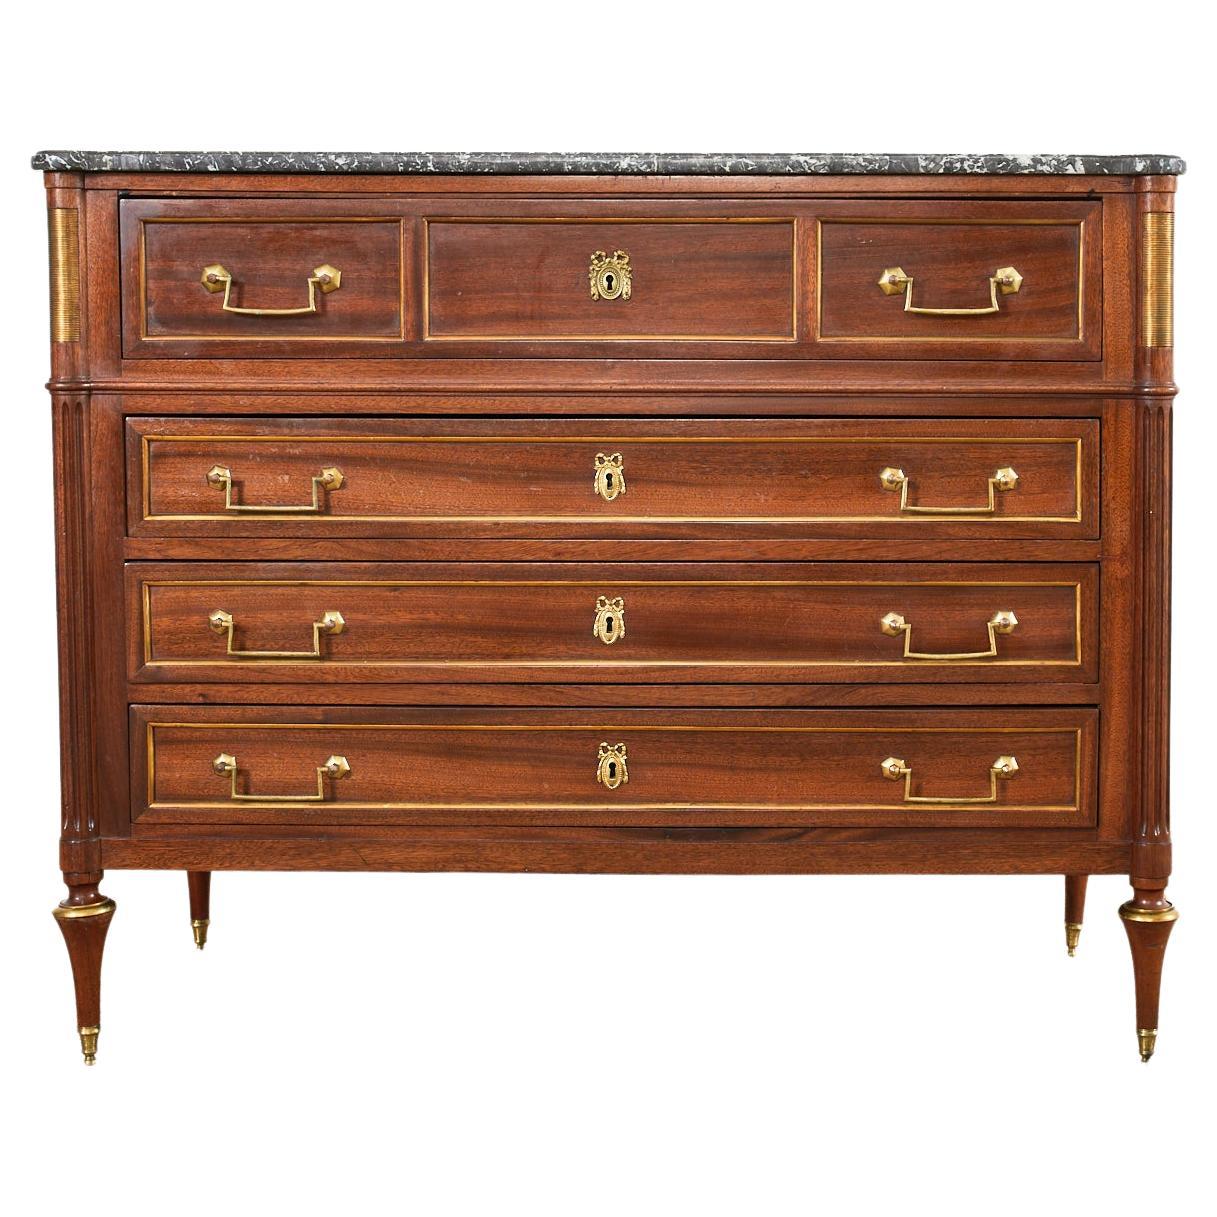 French Louis XVI Style Marble Top Mahogany Commode Chest